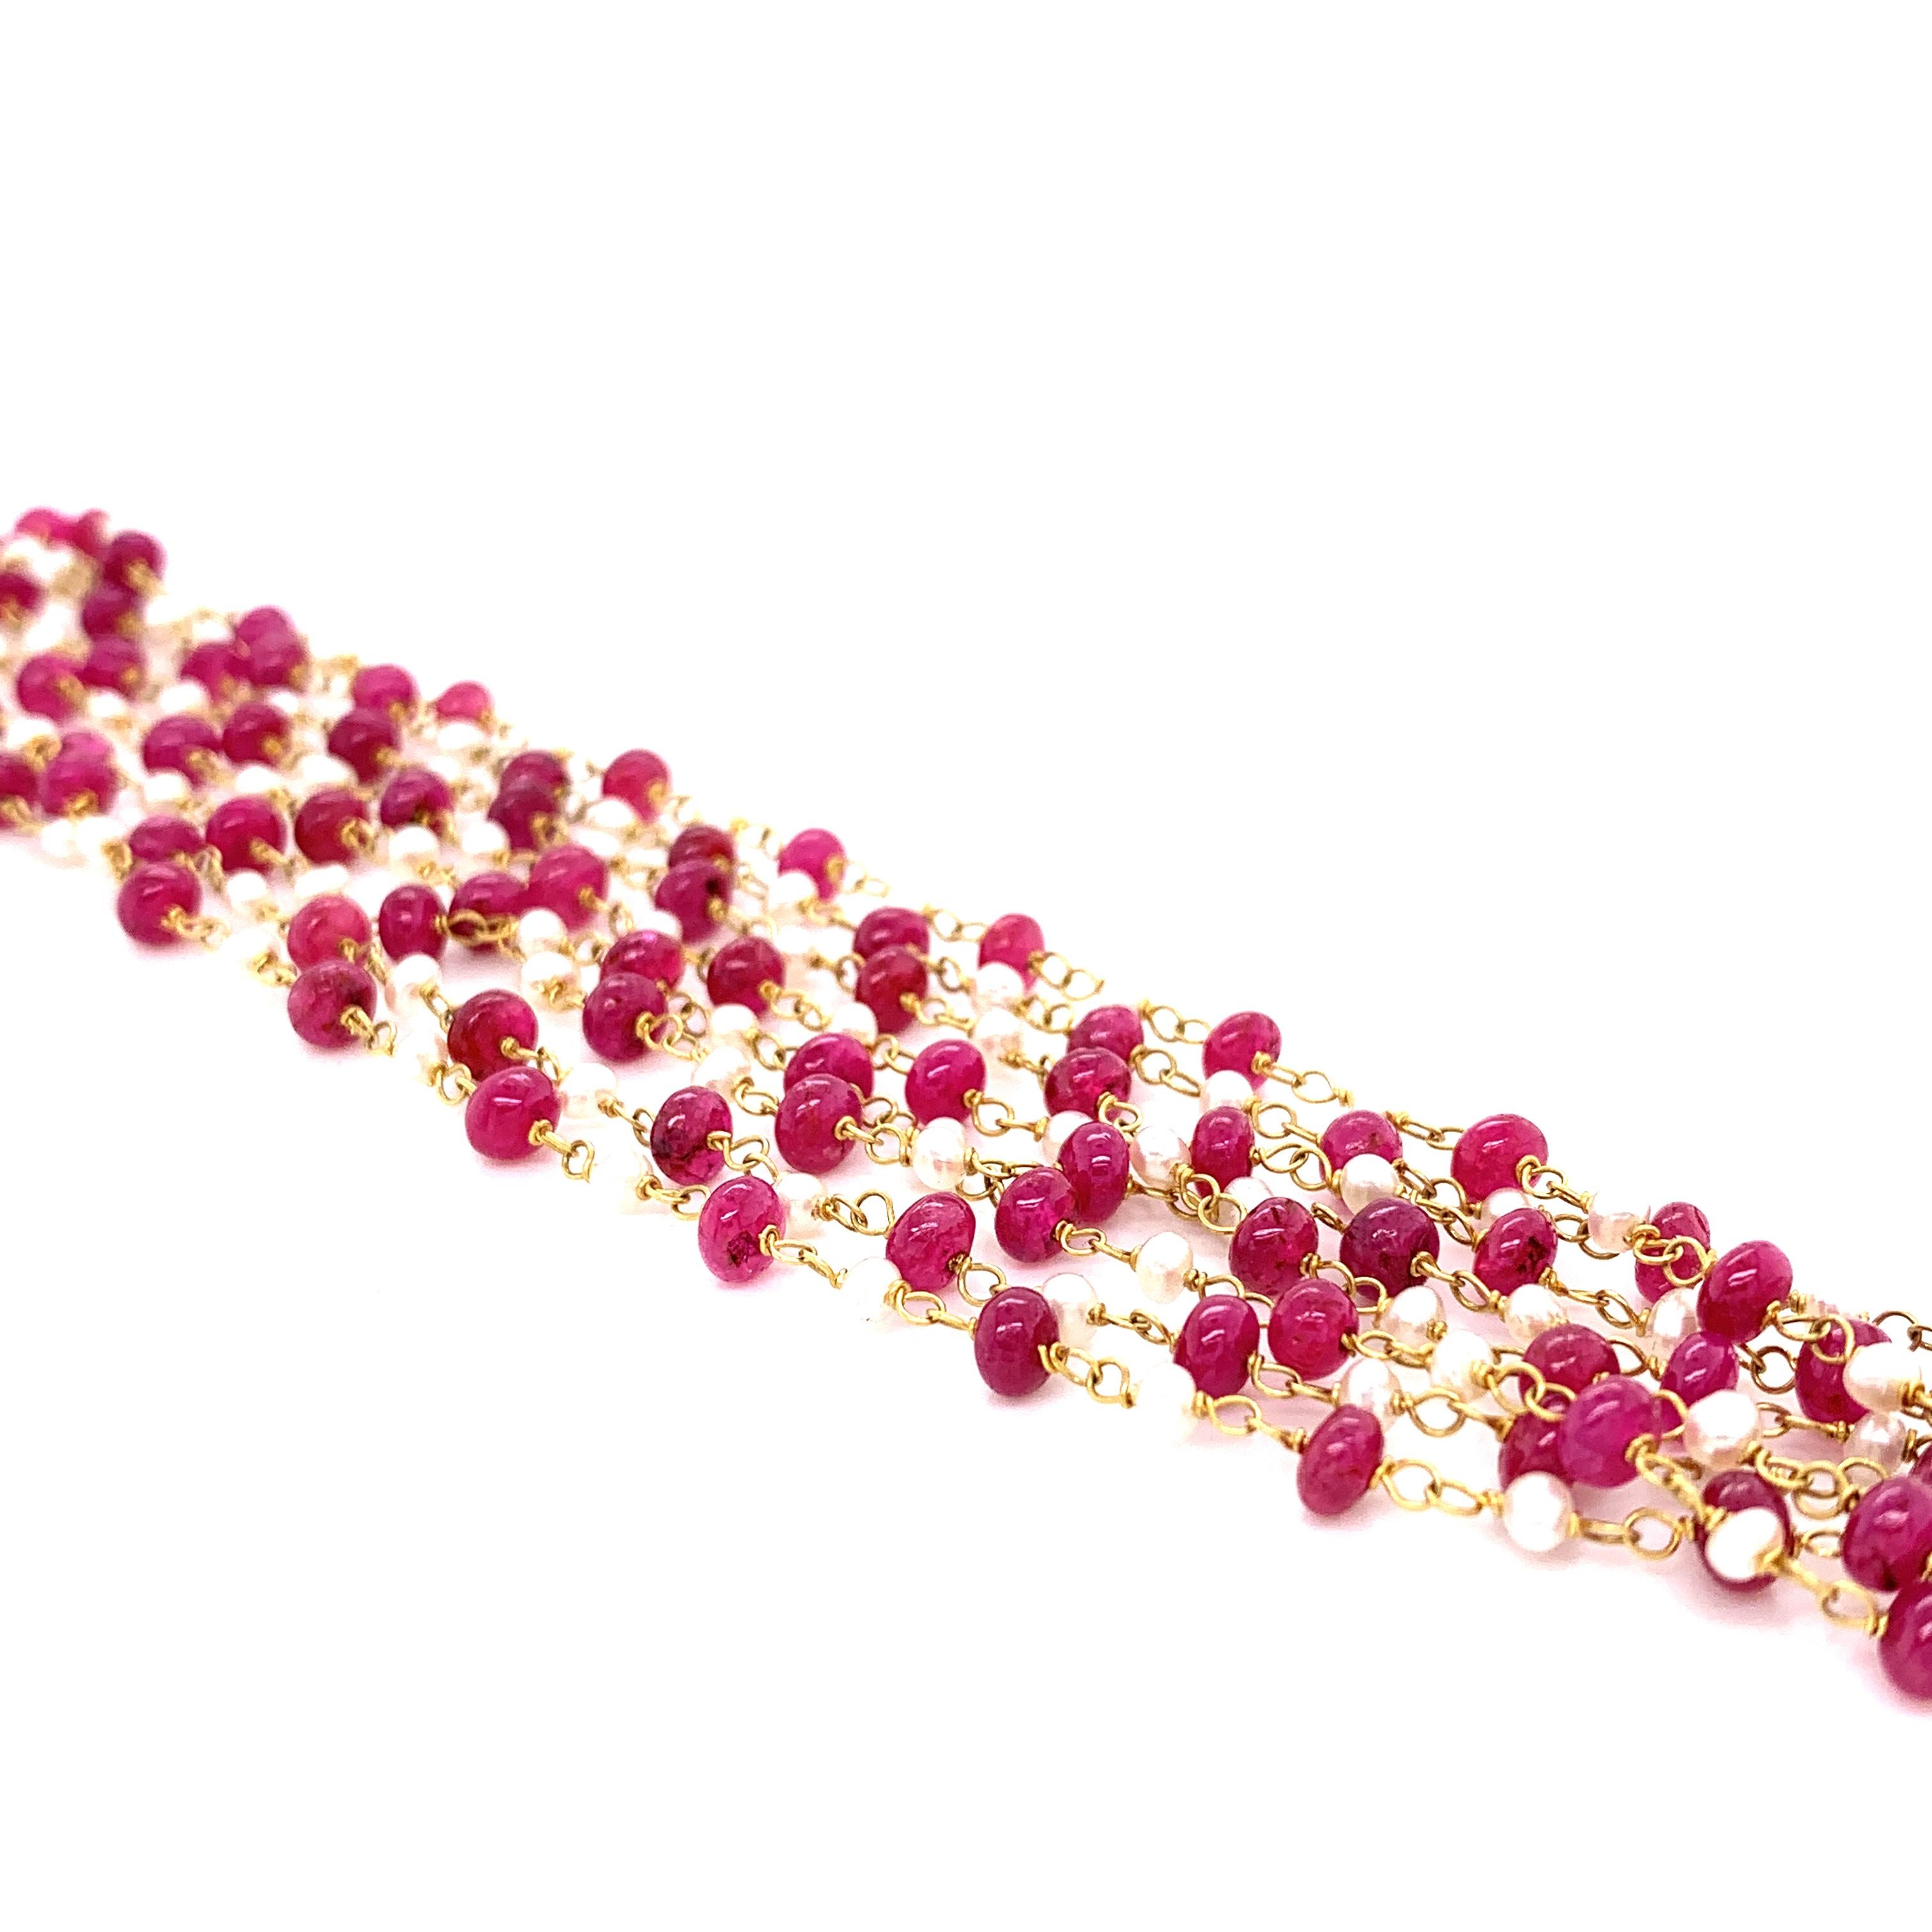 Ruby Beads and Cultured South Sea Pearl 22K Gold Necklace:   

A beautiful necklace, it features fiery red ruby beads weighing 54.05 carat, with 14 carat of cultured South Sea white pearls interspersed amongst the rubies. The rubies are of good